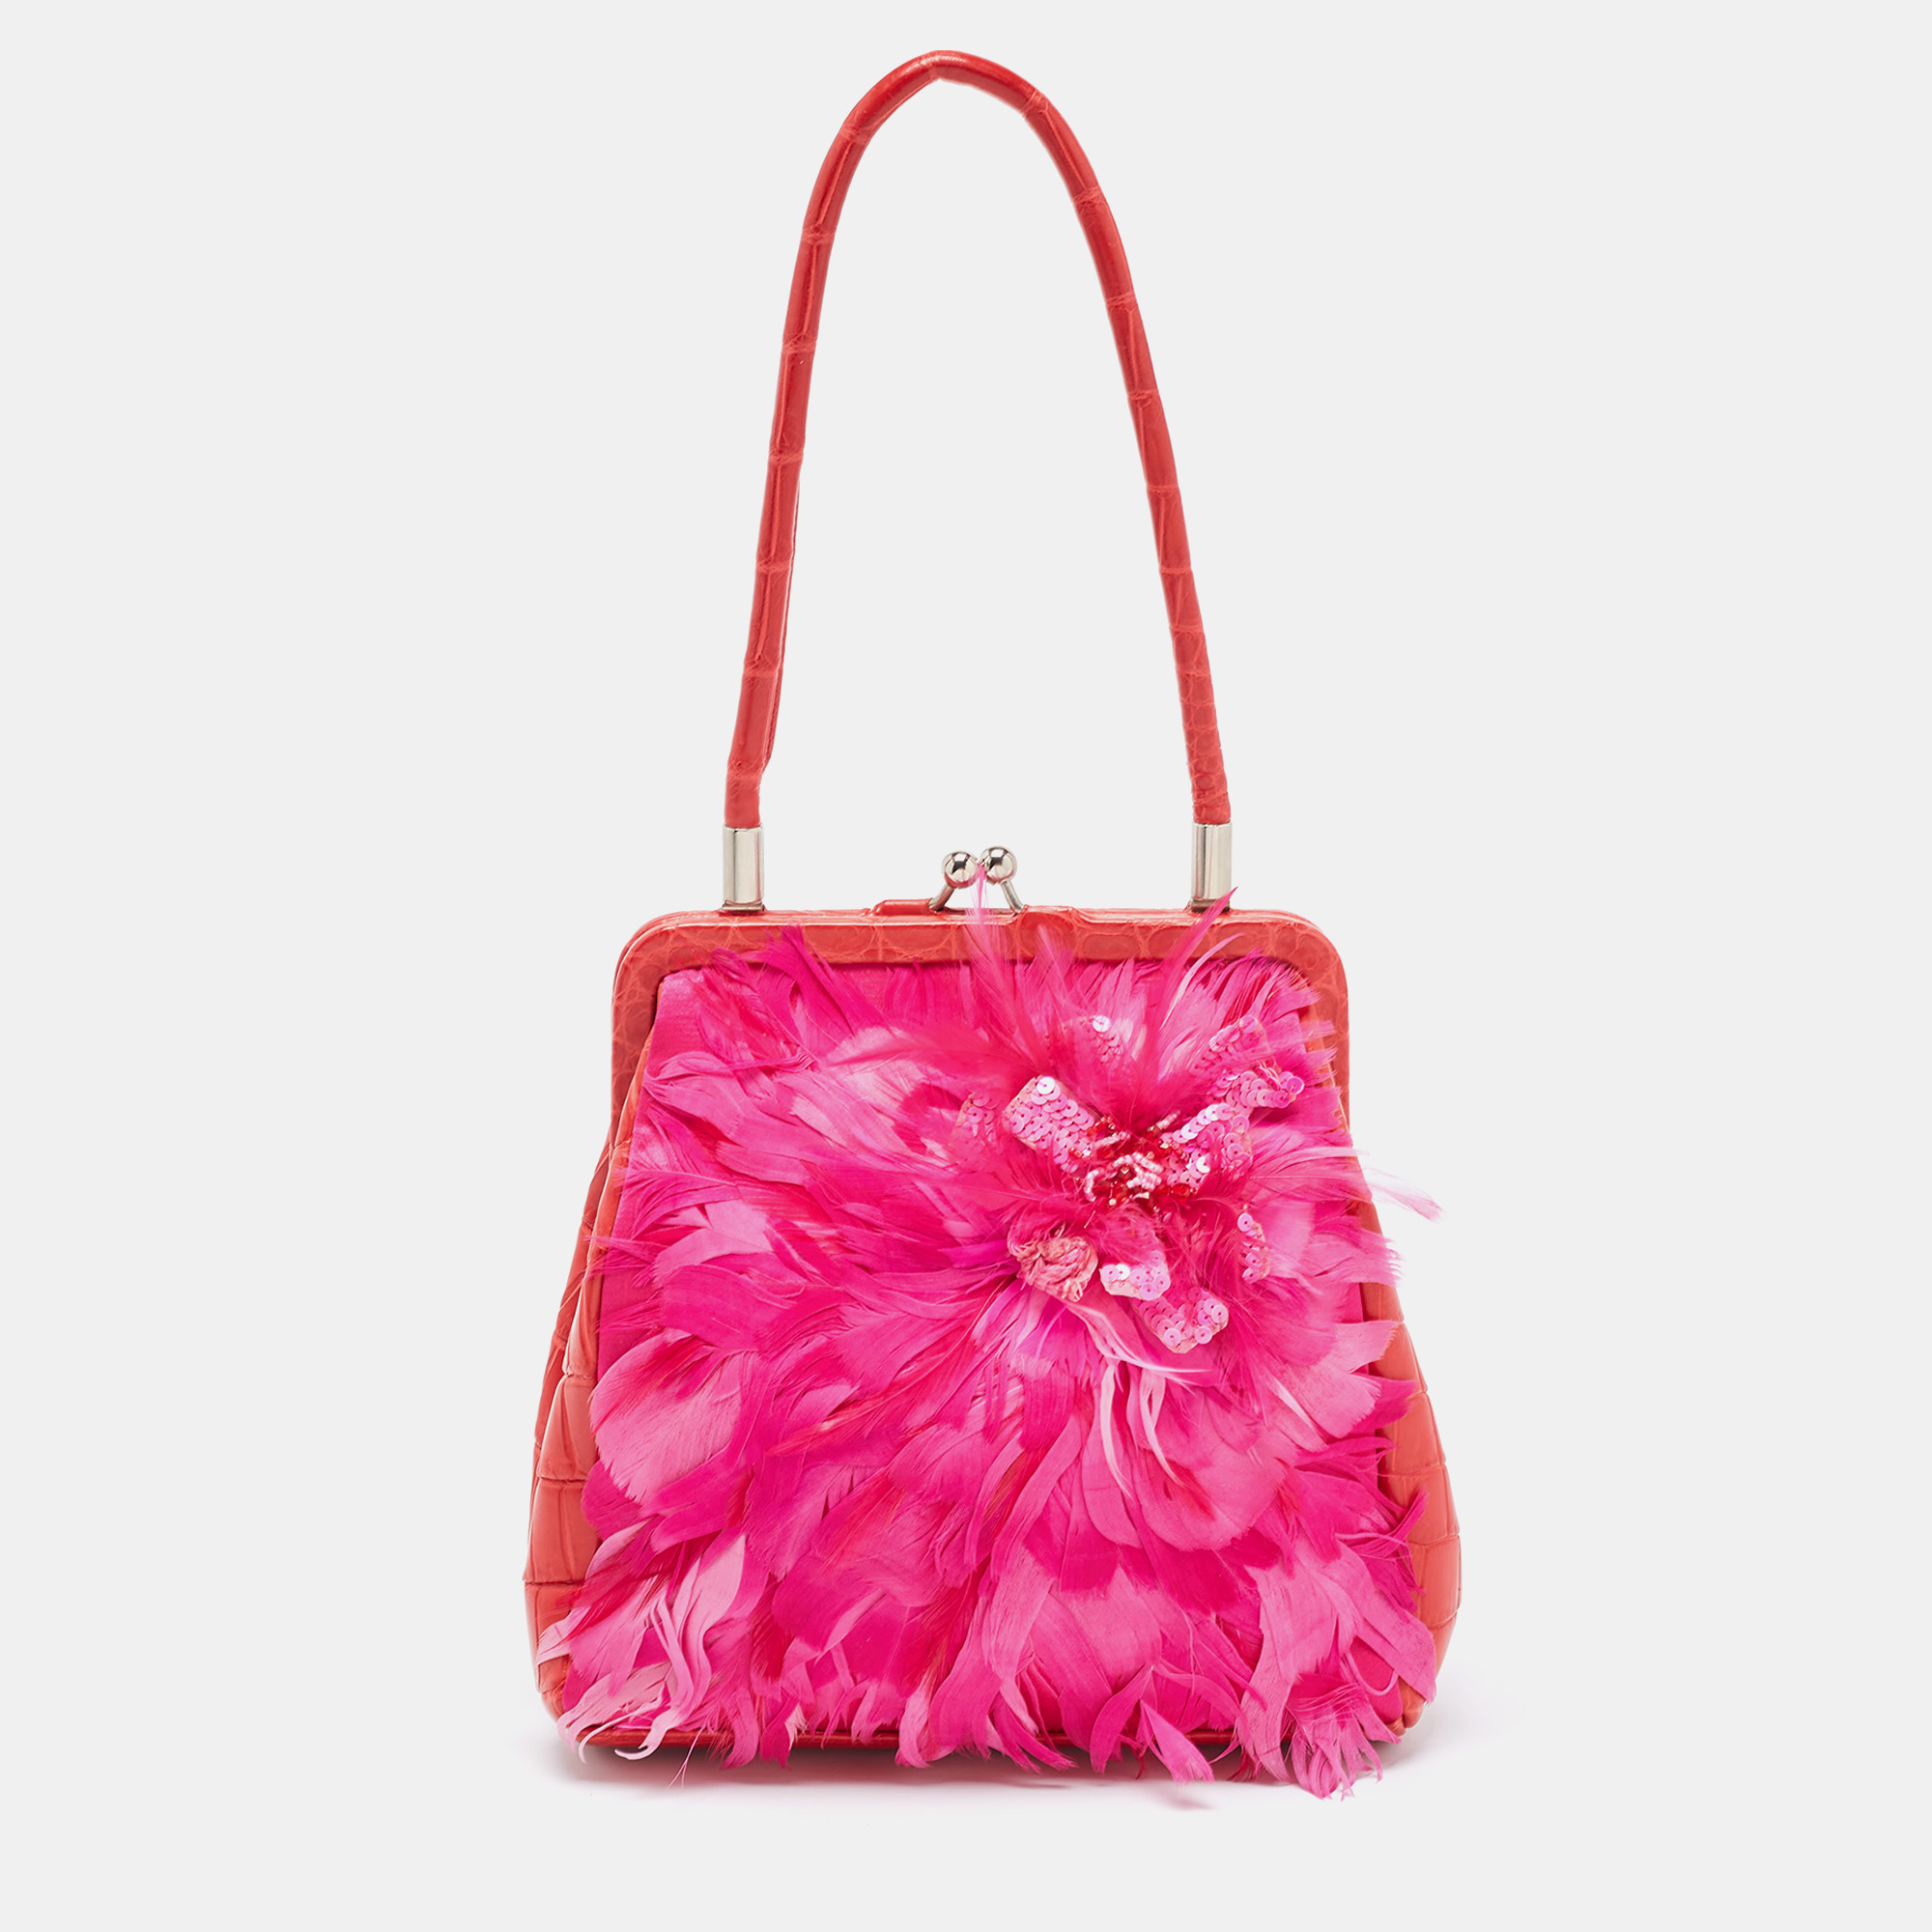 Gianfranco Ferre Red/Magenta Crocodile And Feather Top Handle Bag